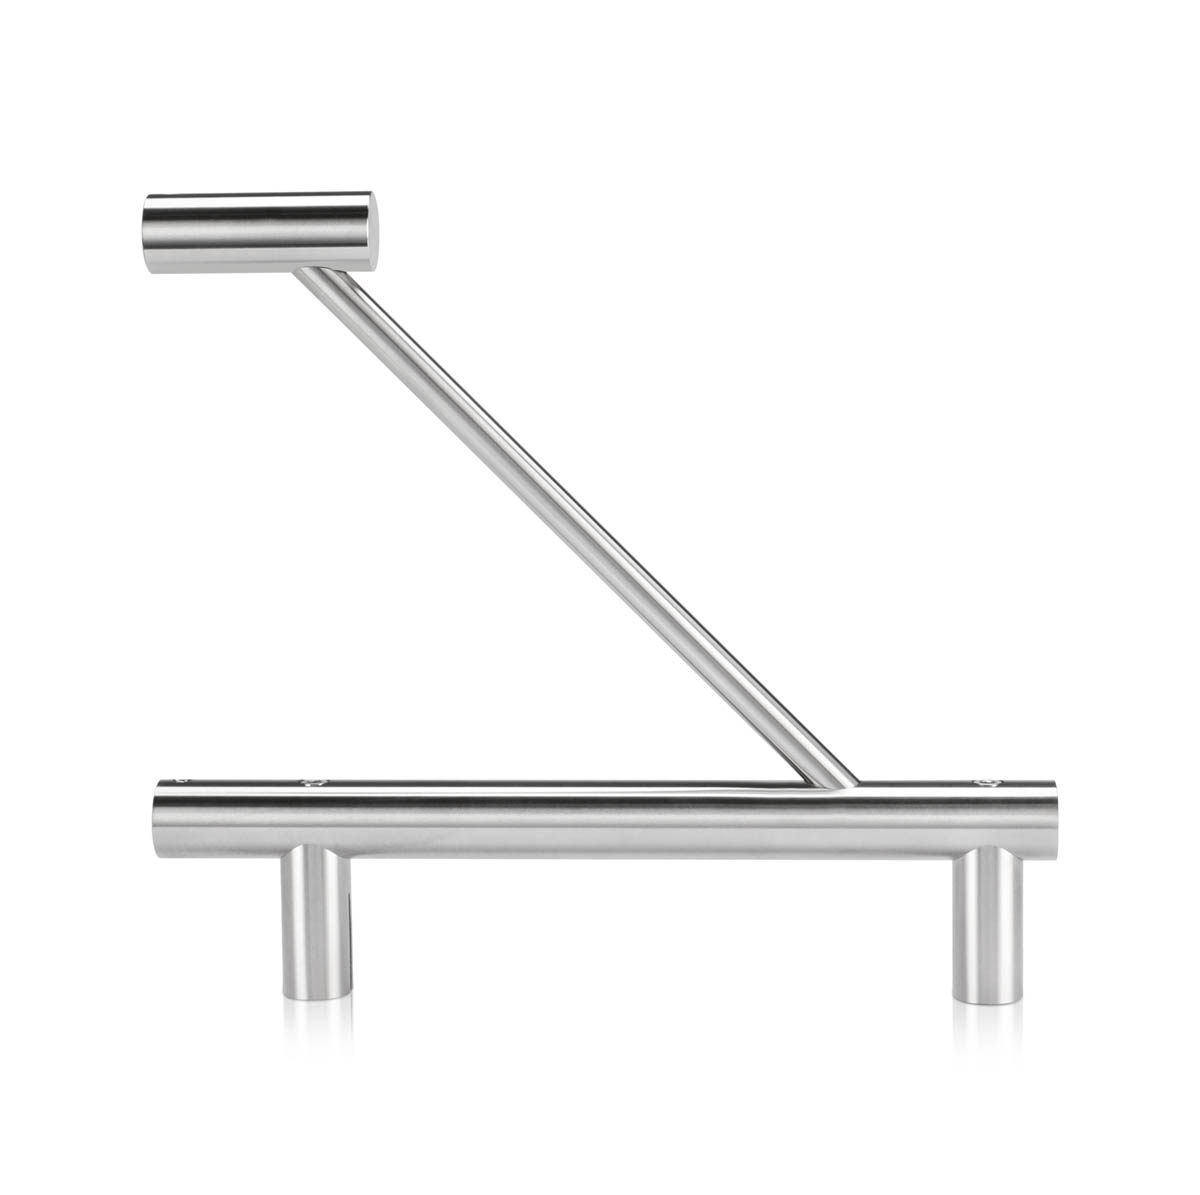 Aluminum Flag Sign Bracket Only, Stainless Steel Satin Brushed Finish. 5/16'' Thickness Material Accepted, 7-7/8 Length, 3/4'' Diameter. (Sold Without Panel, Bracket Only)